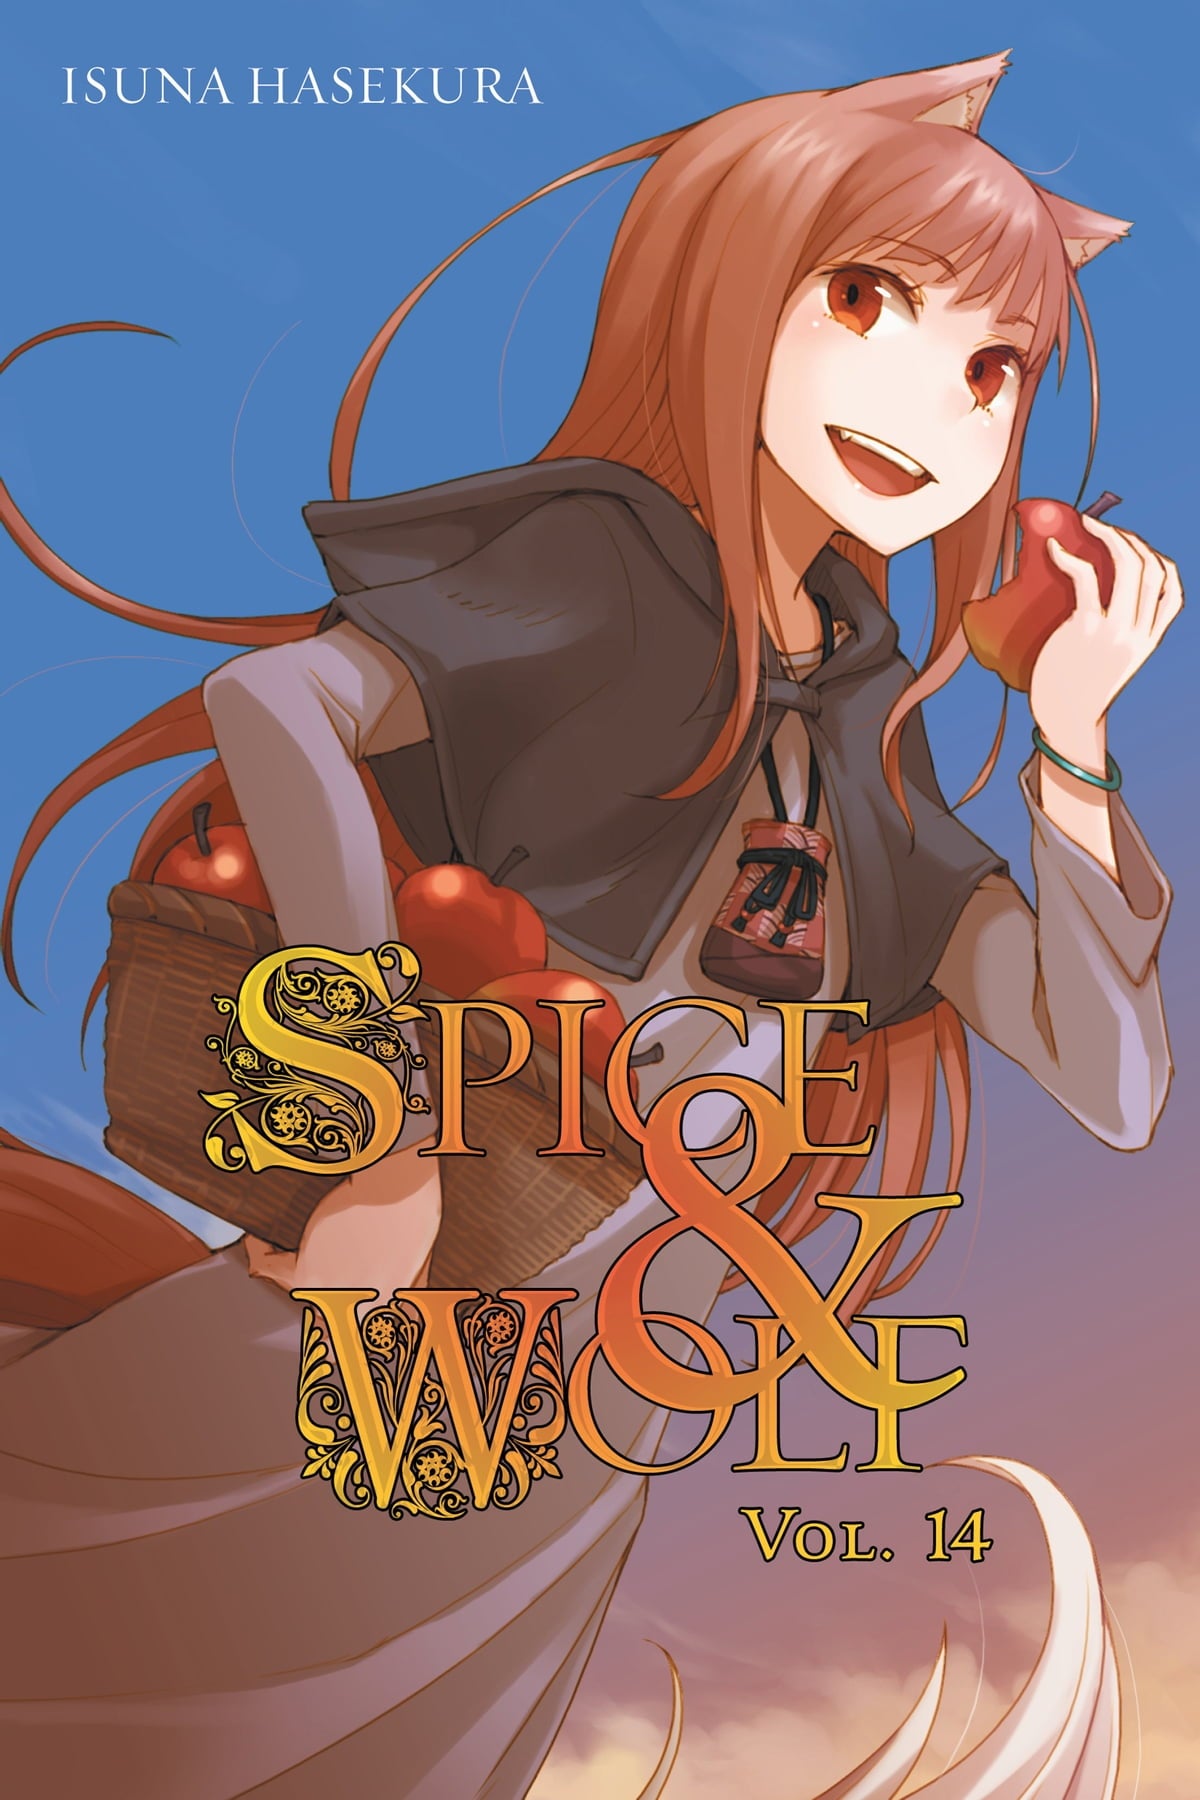 Spice and Wolf Vol. 14 (Light Novel)